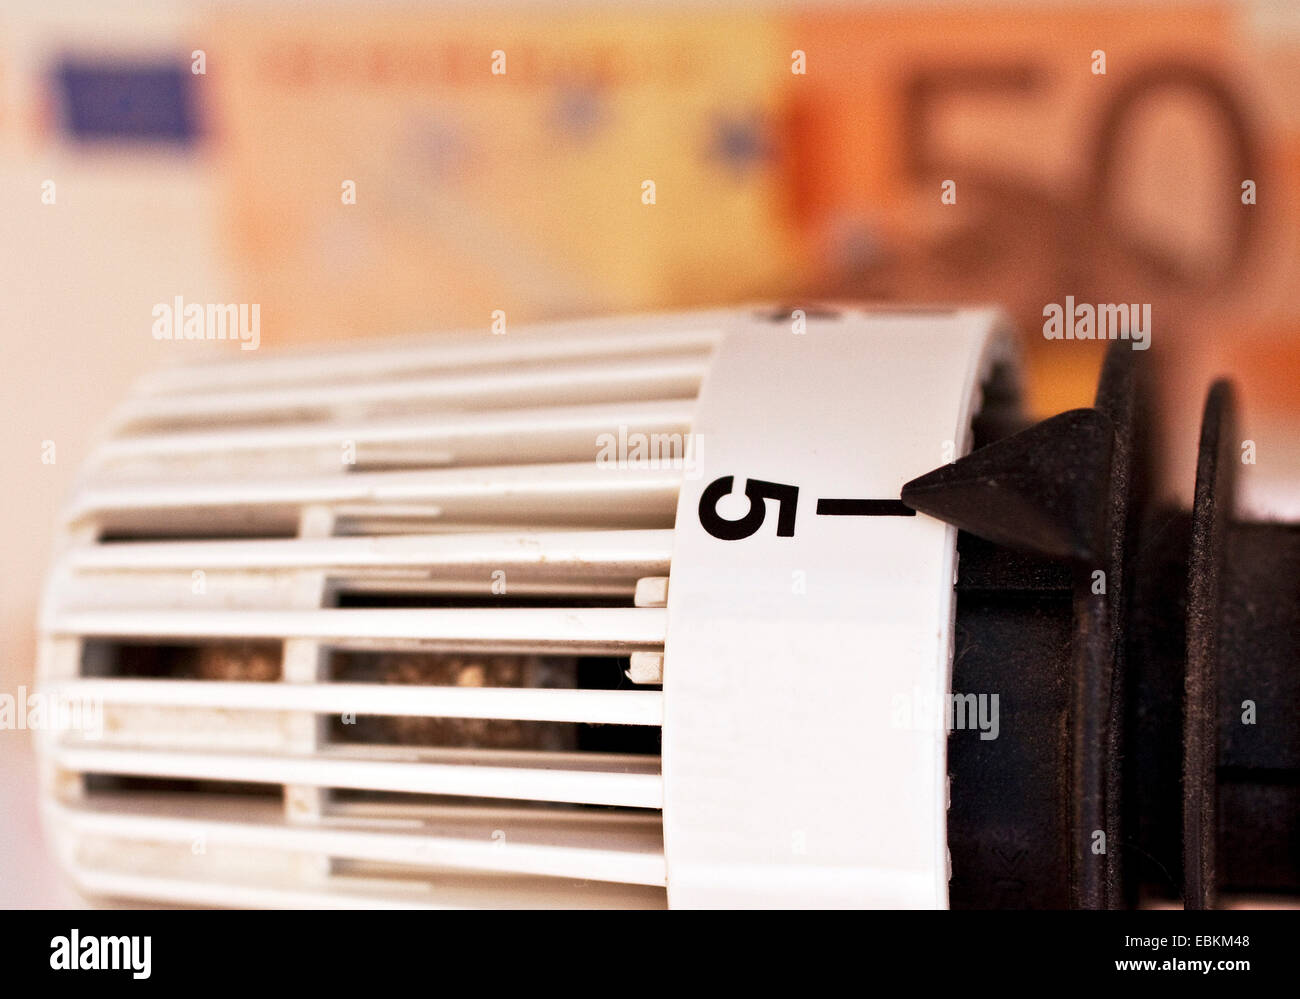 radiator thermostat and bank notes, symbol picture for heating costs, Germany Stock Photo